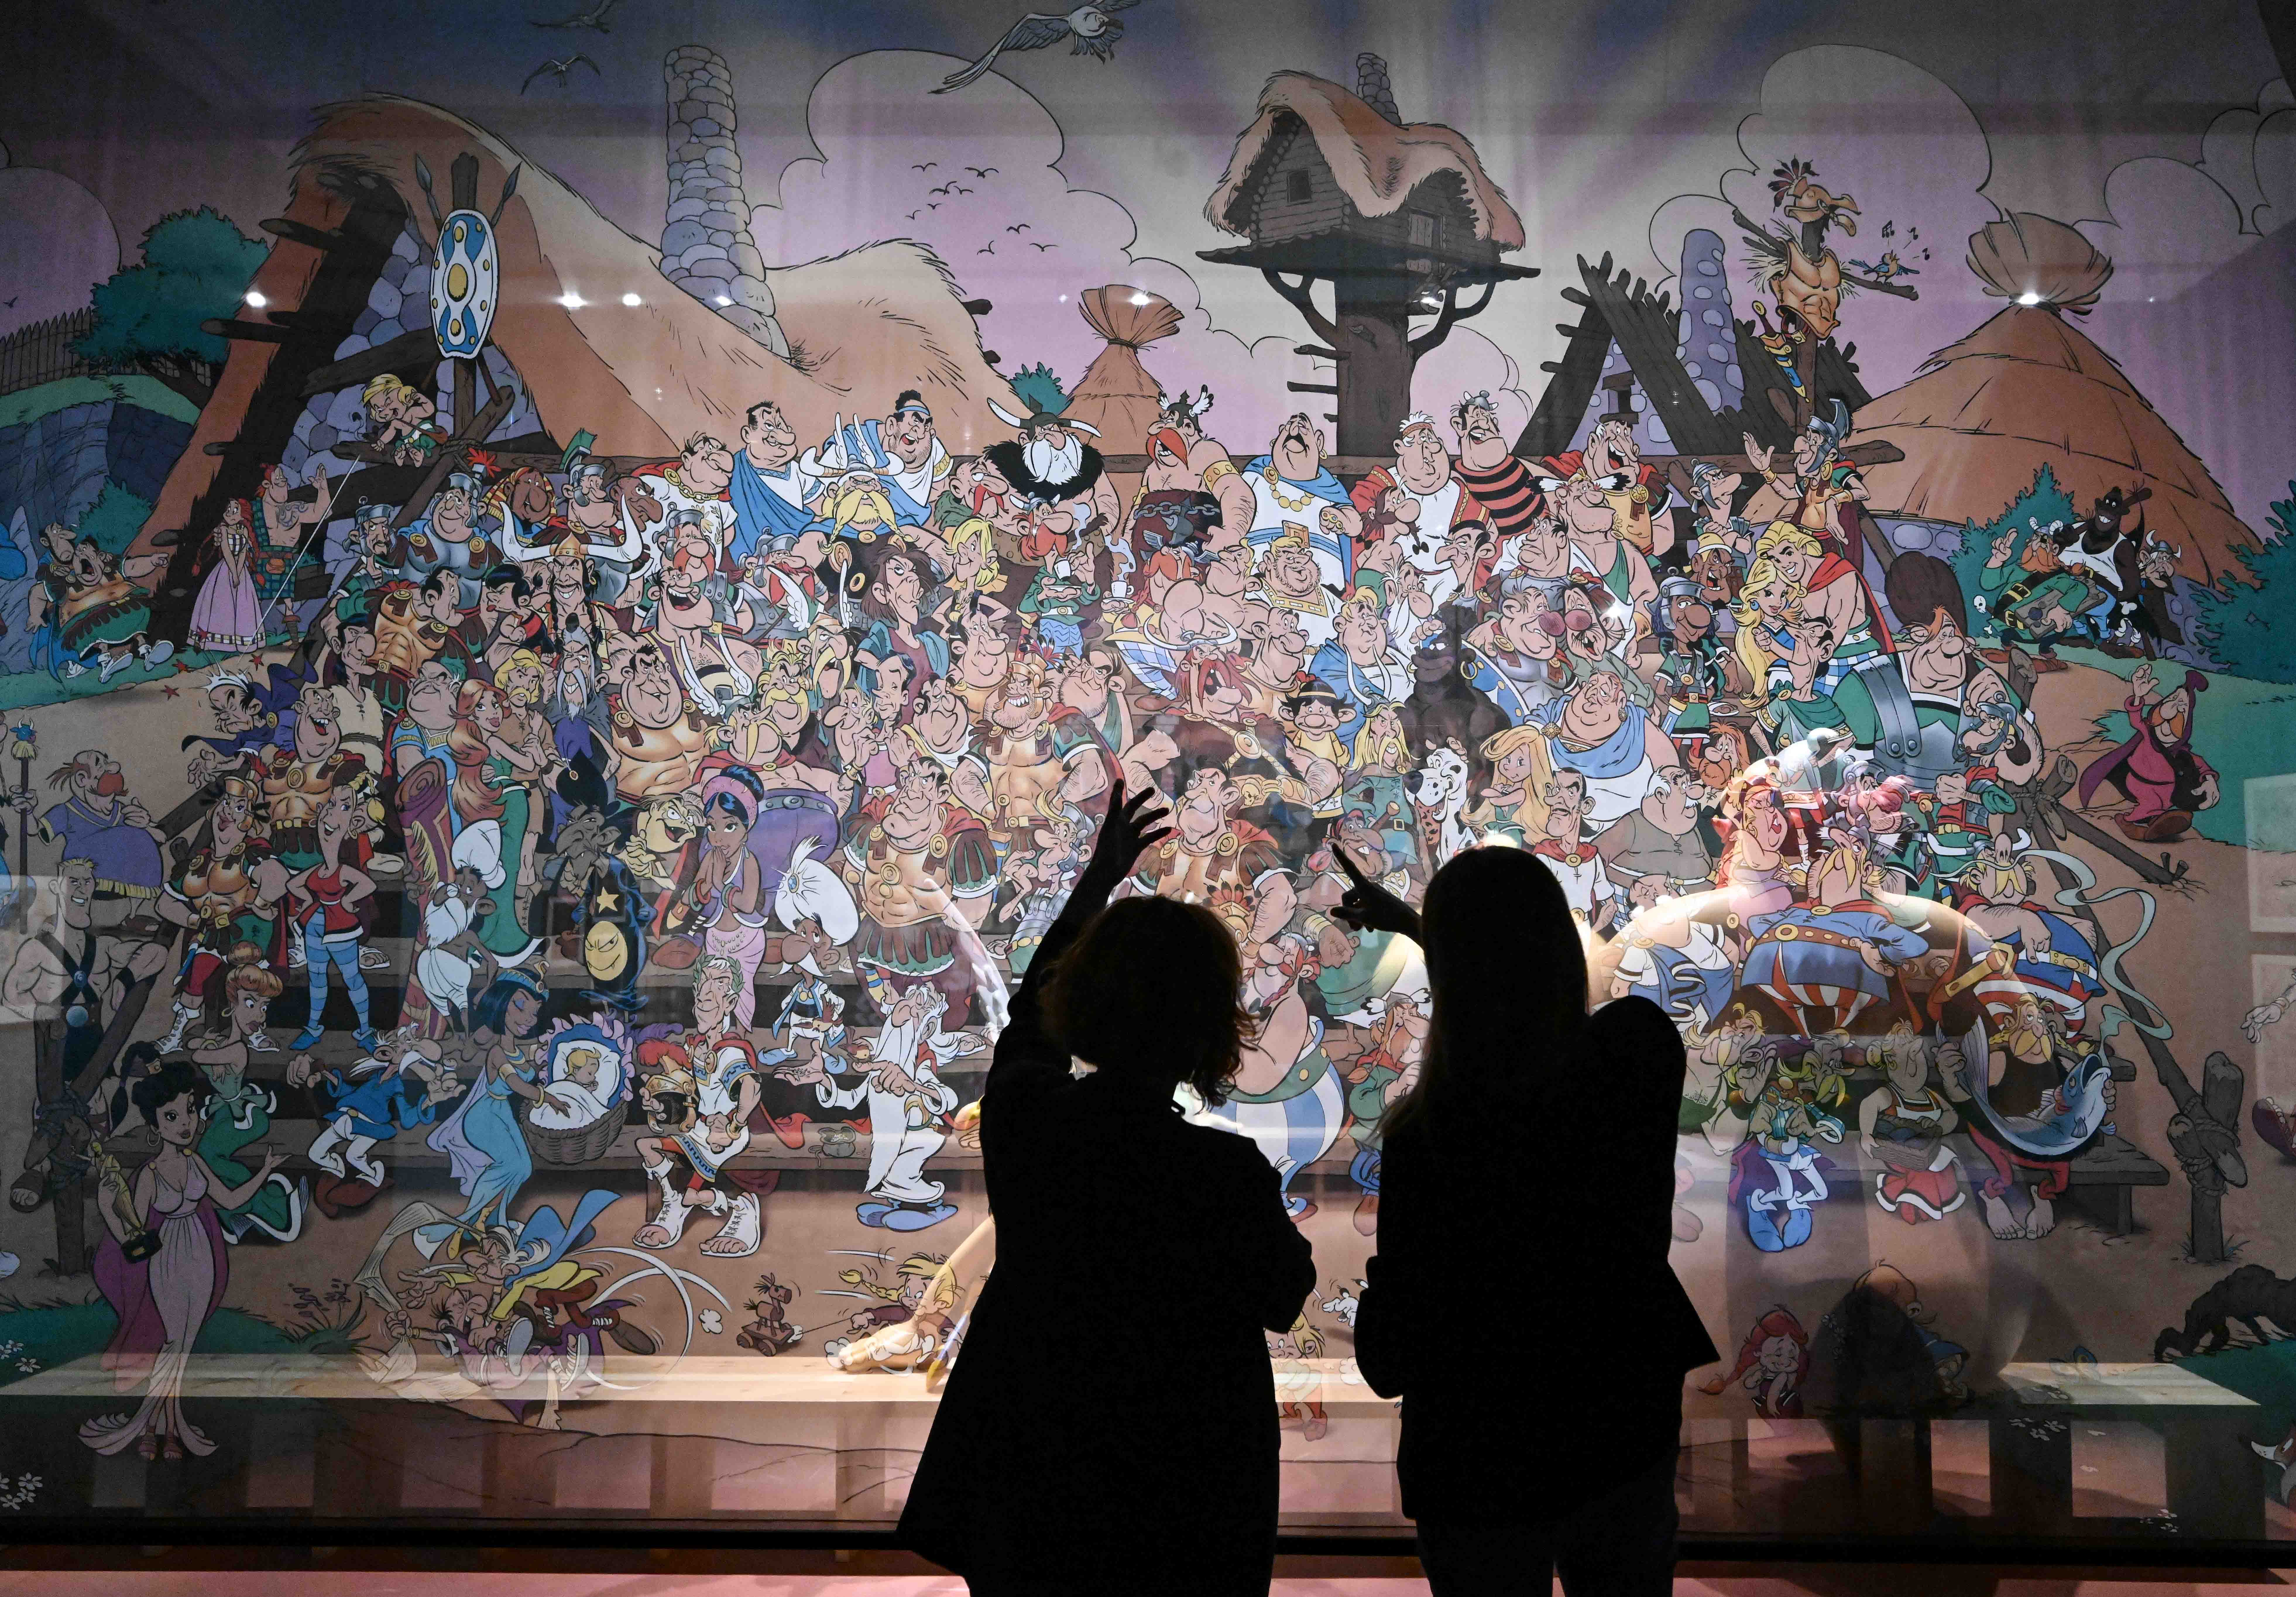 Visitors browse one of the more than 300 items on display at the Comic exhibition in the CaixaForum